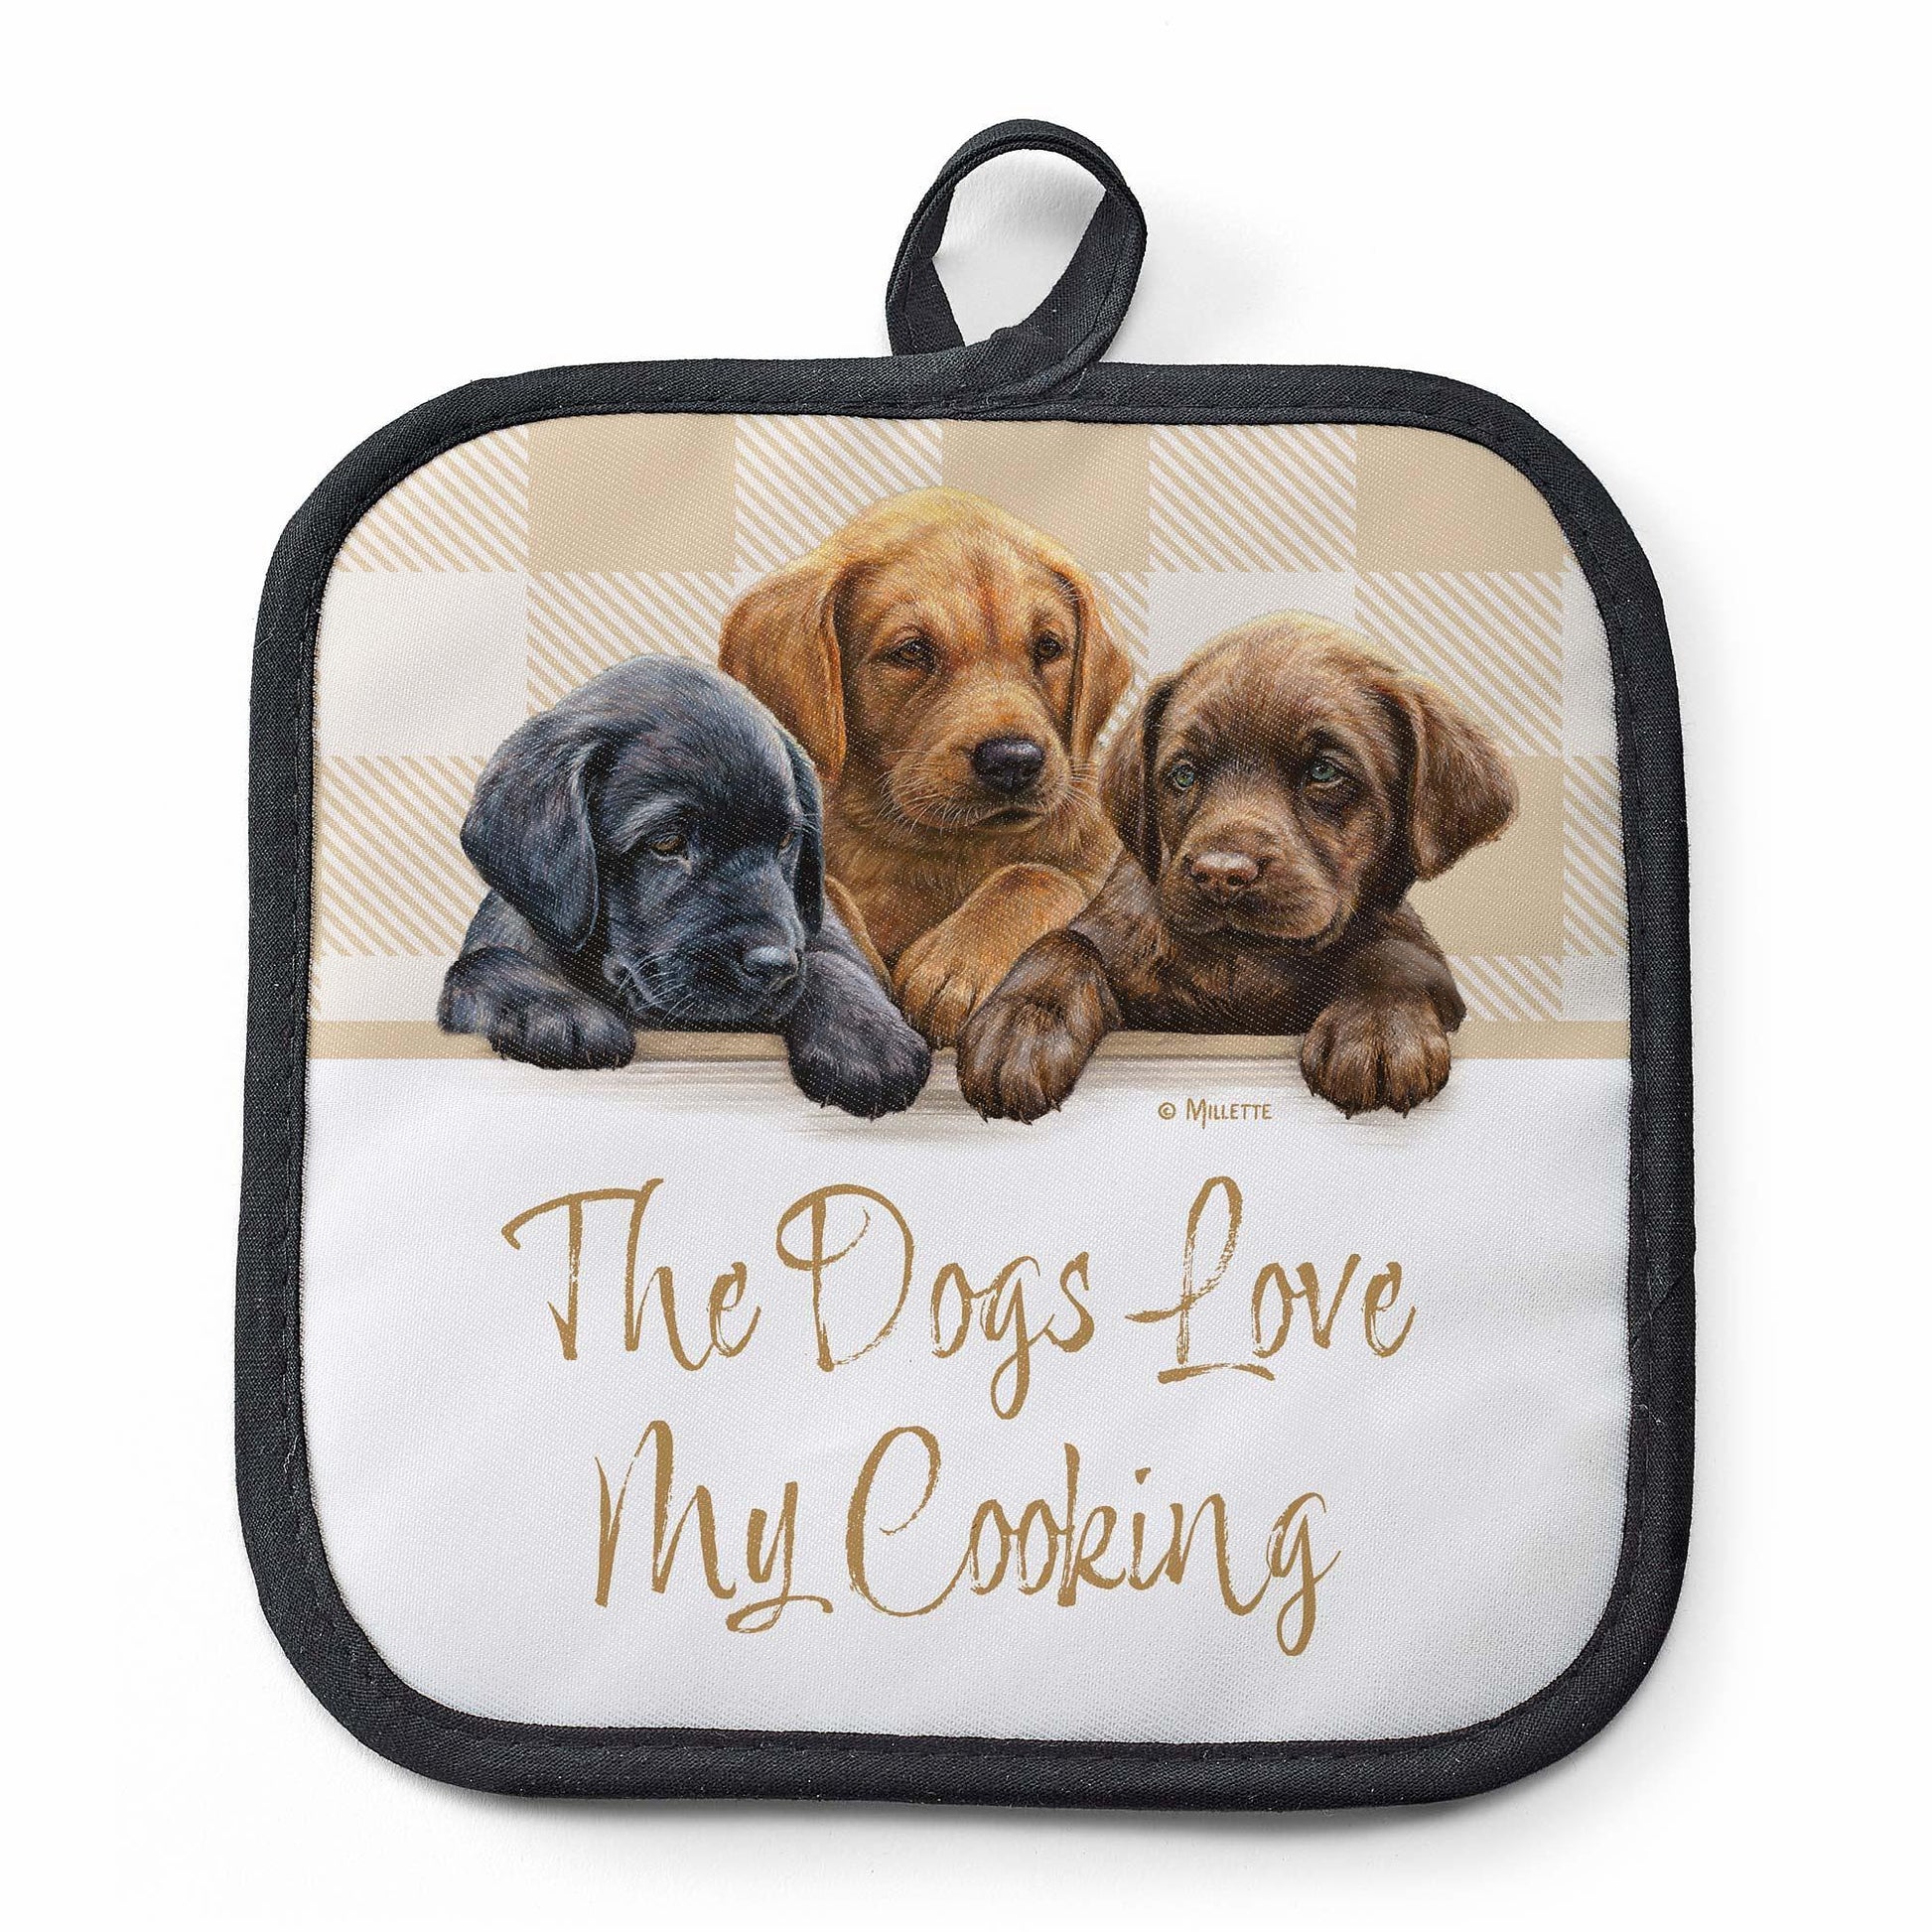 All Hands on Deck—Puppies Pot Holder - Wild Wings